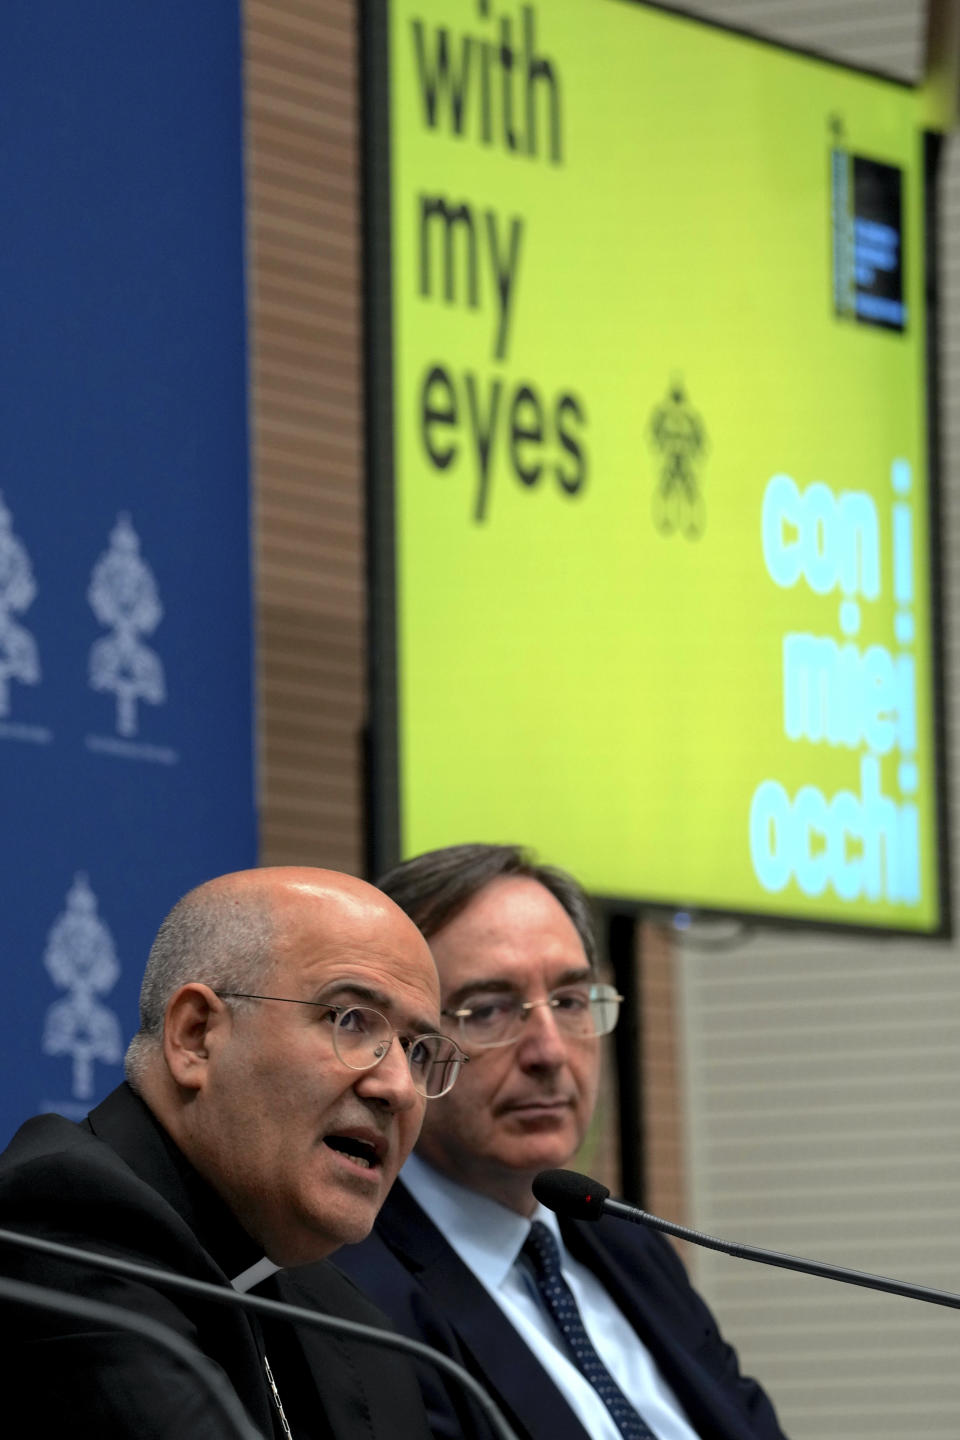 From left, Vatican Prefect of the Dicastery for Culture and Education, Card. José Tolentino de Mendonça and Giovanni Russo, head of the Italian Prison Administration attend a press conference at The Vatican, Monday, March 11, 2024, to present "With my Eyes", the Holy See pavillion for the 60th edition of the Venice Biennale of Arts opening on April 20th, 2024. (AP Photo/Domenico Stinellis)